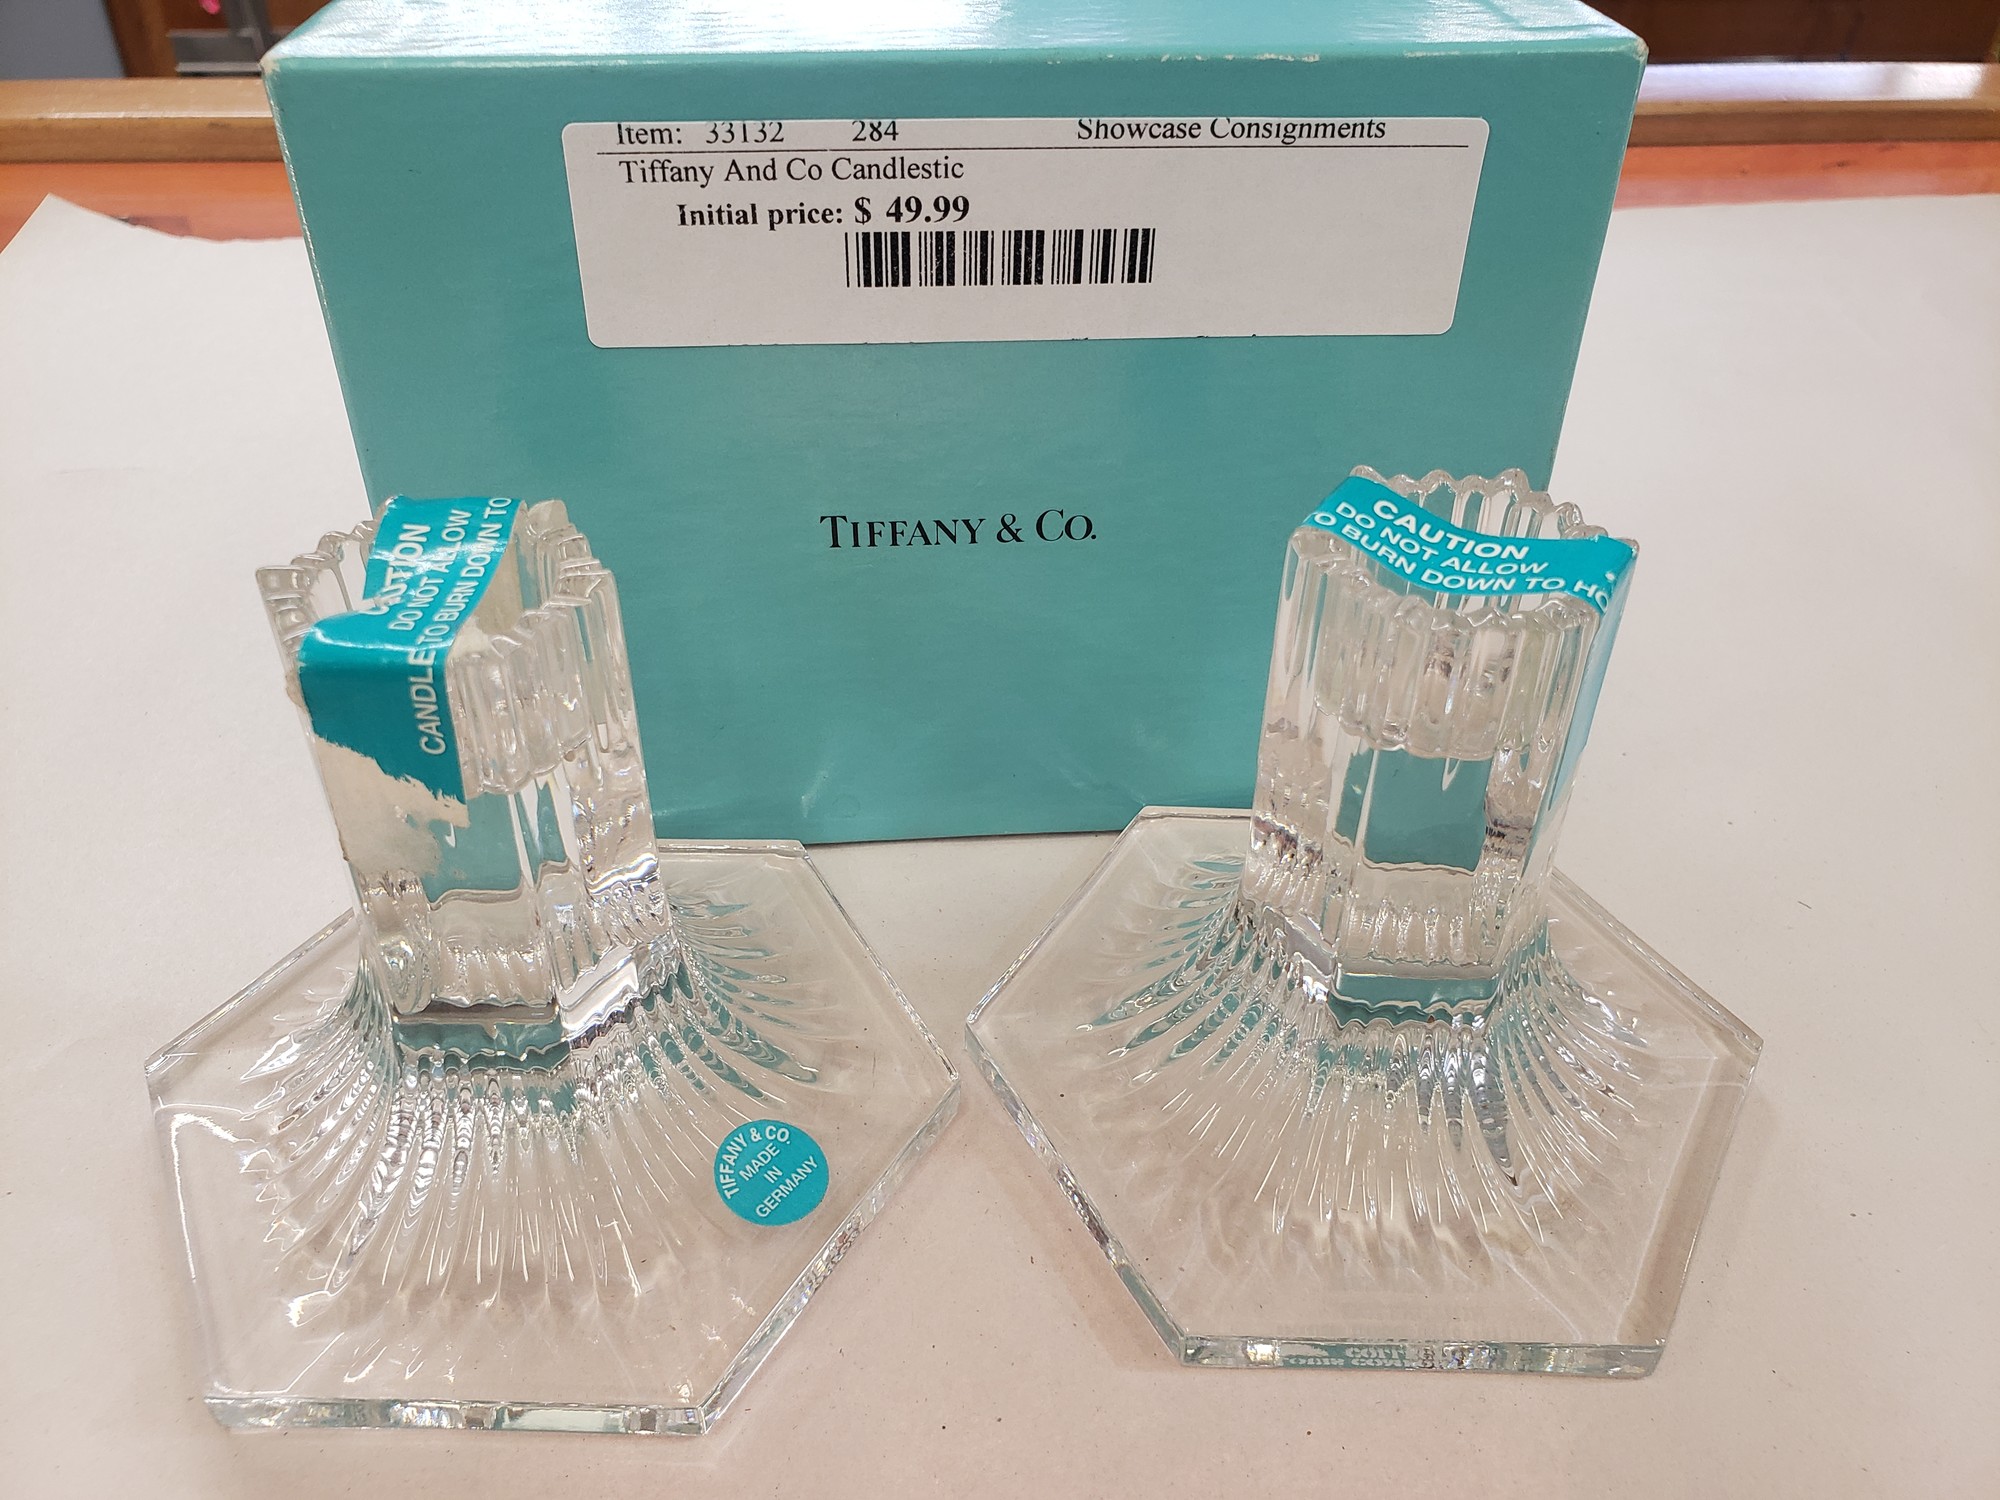 Tiffany And Co Candlestic
Please call or email for specific dimensions etc. Return are generally not allowed on consignment items. Any returns authorized are subject to a 20 % restocking fee!